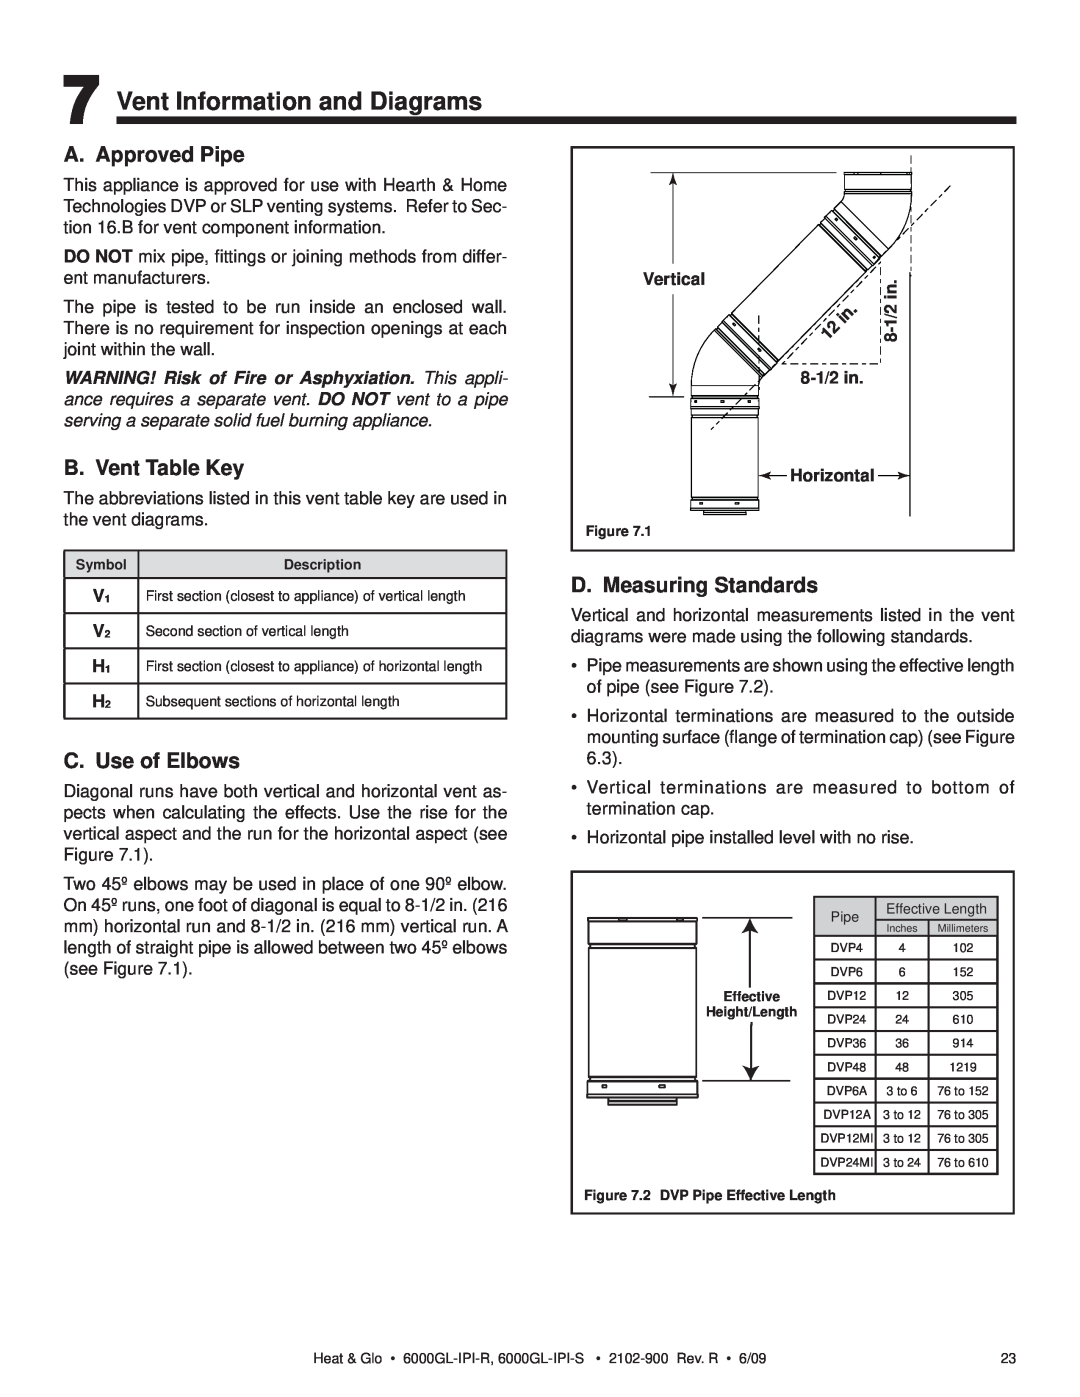 Heat & Glo LifeStyle 6000GL-IPI-R Vent Information and Diagrams, A. Approved Pipe, B. Vent Table Key, C. Use of Elbows 